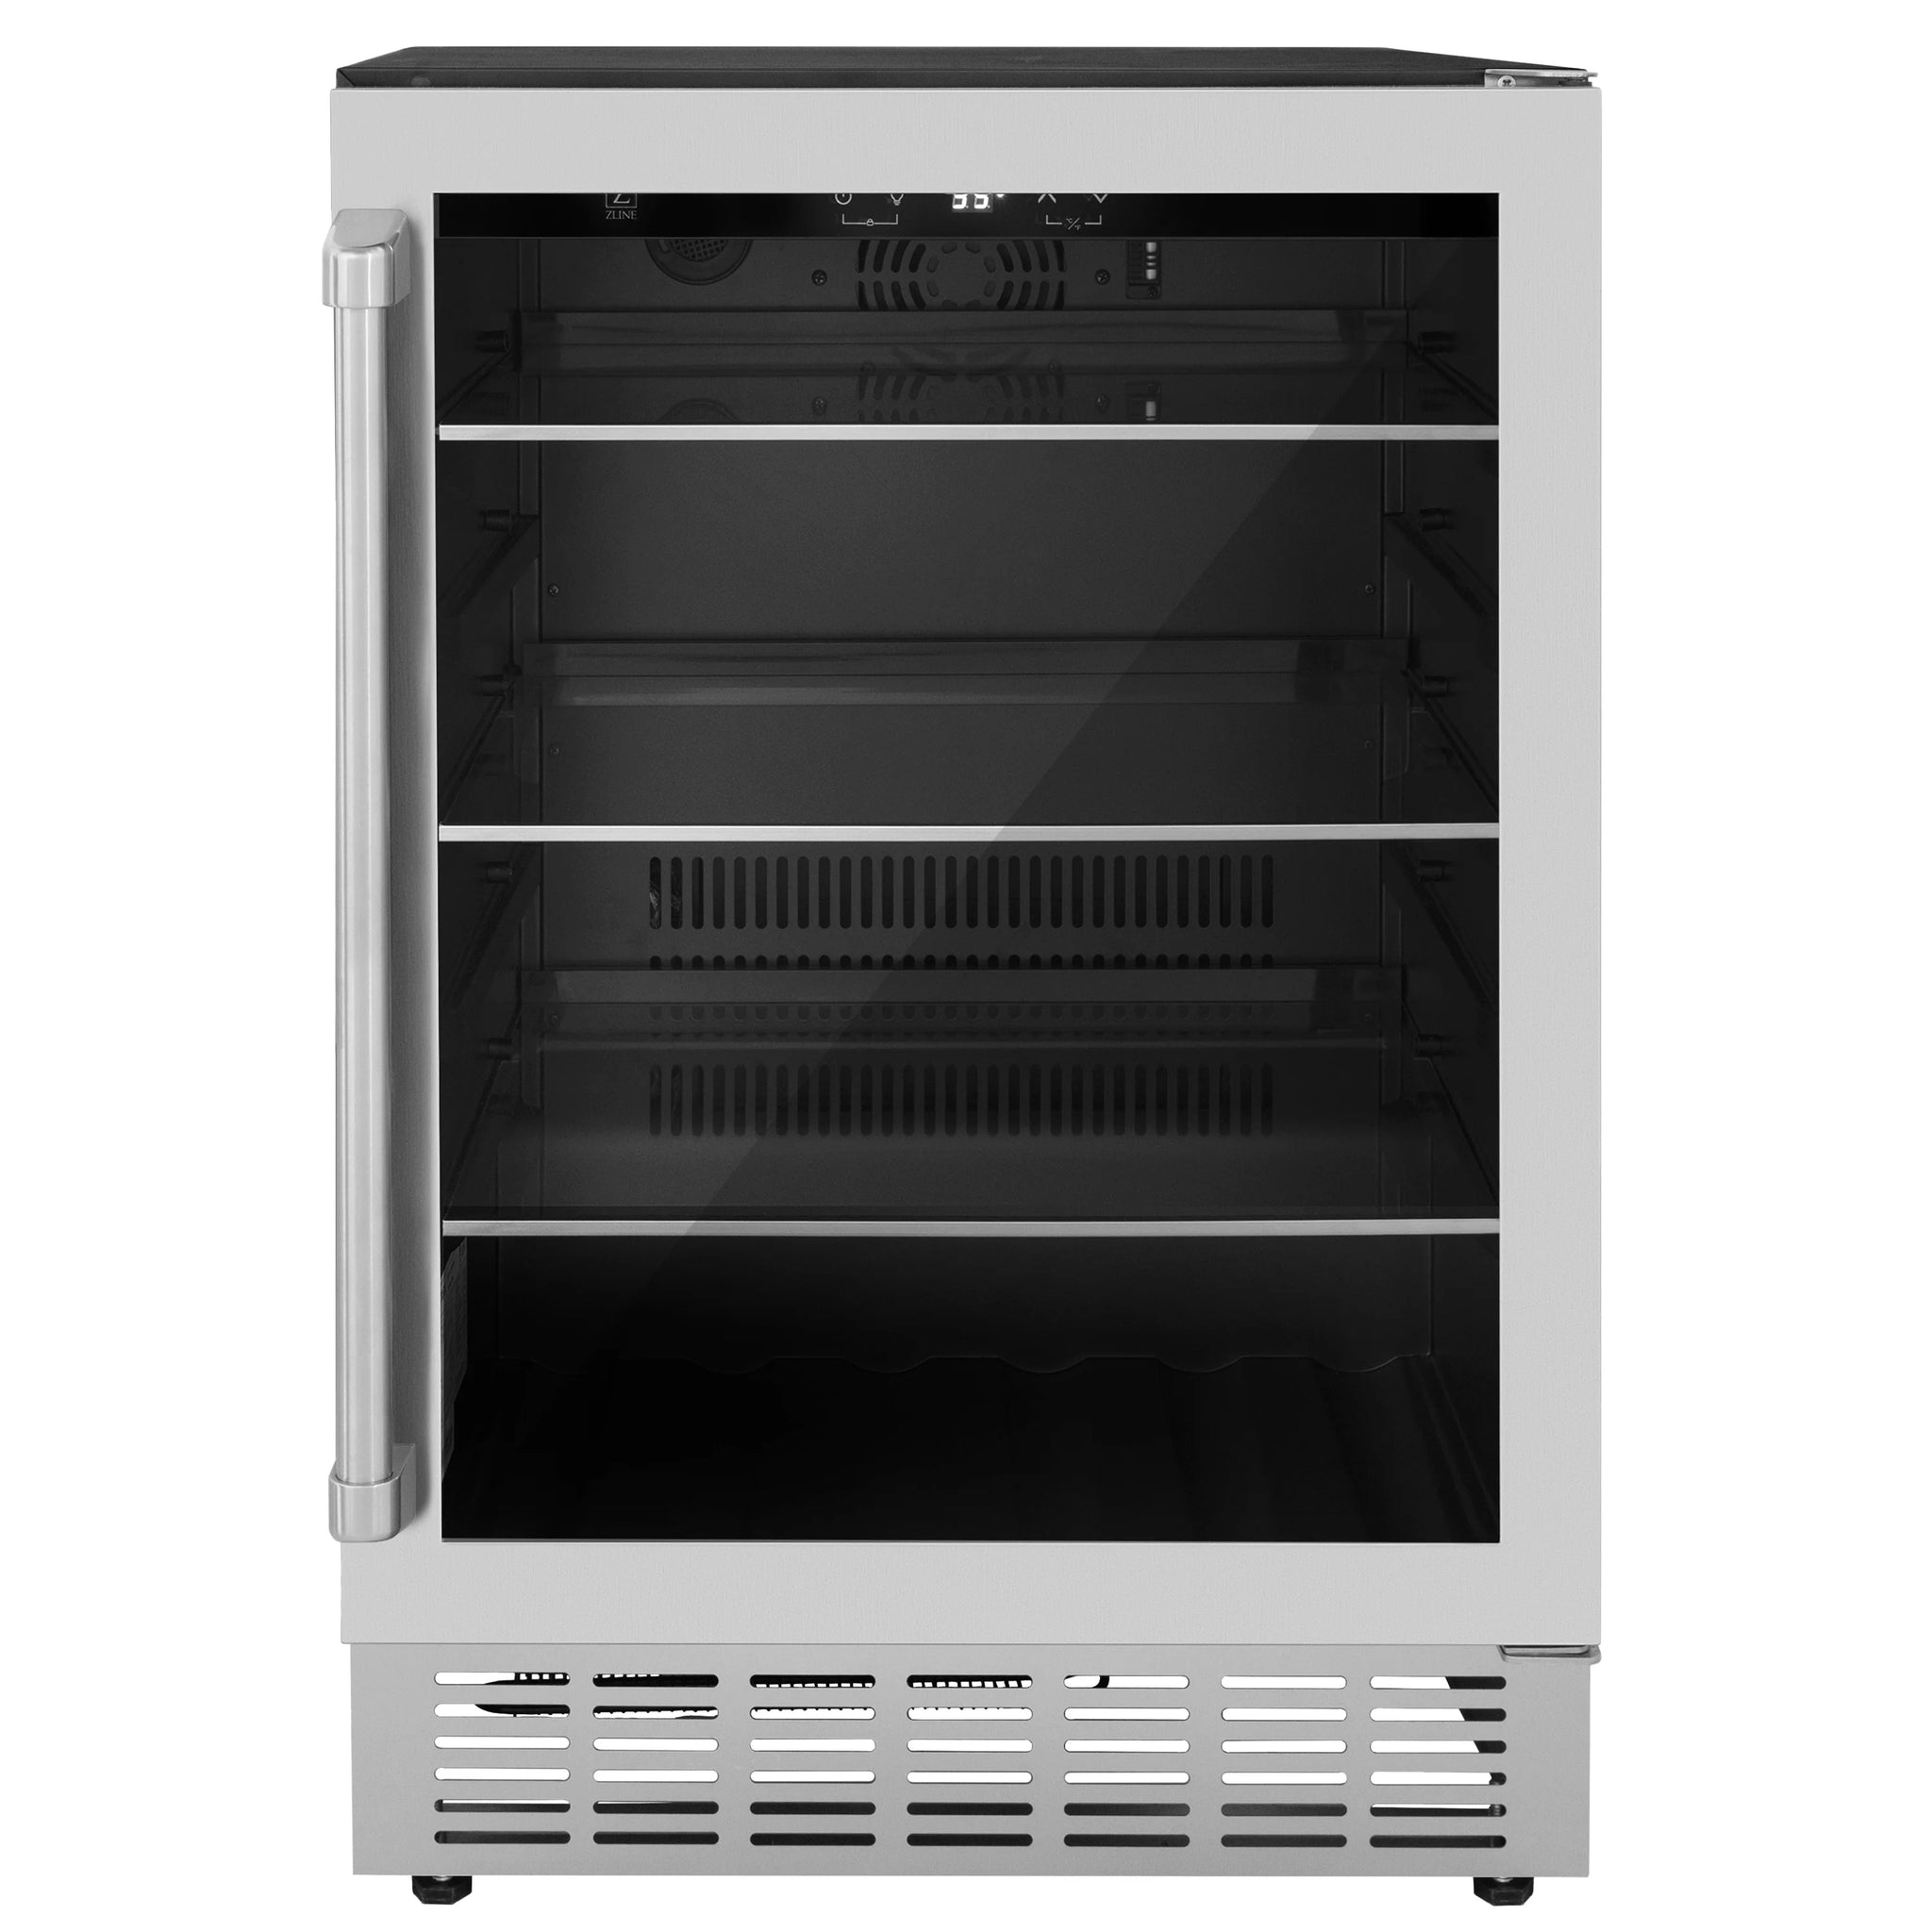 ZLINE 24" 154 Can Beverage Fridge in Stainless Steel - Monument Series, RBV-US-24